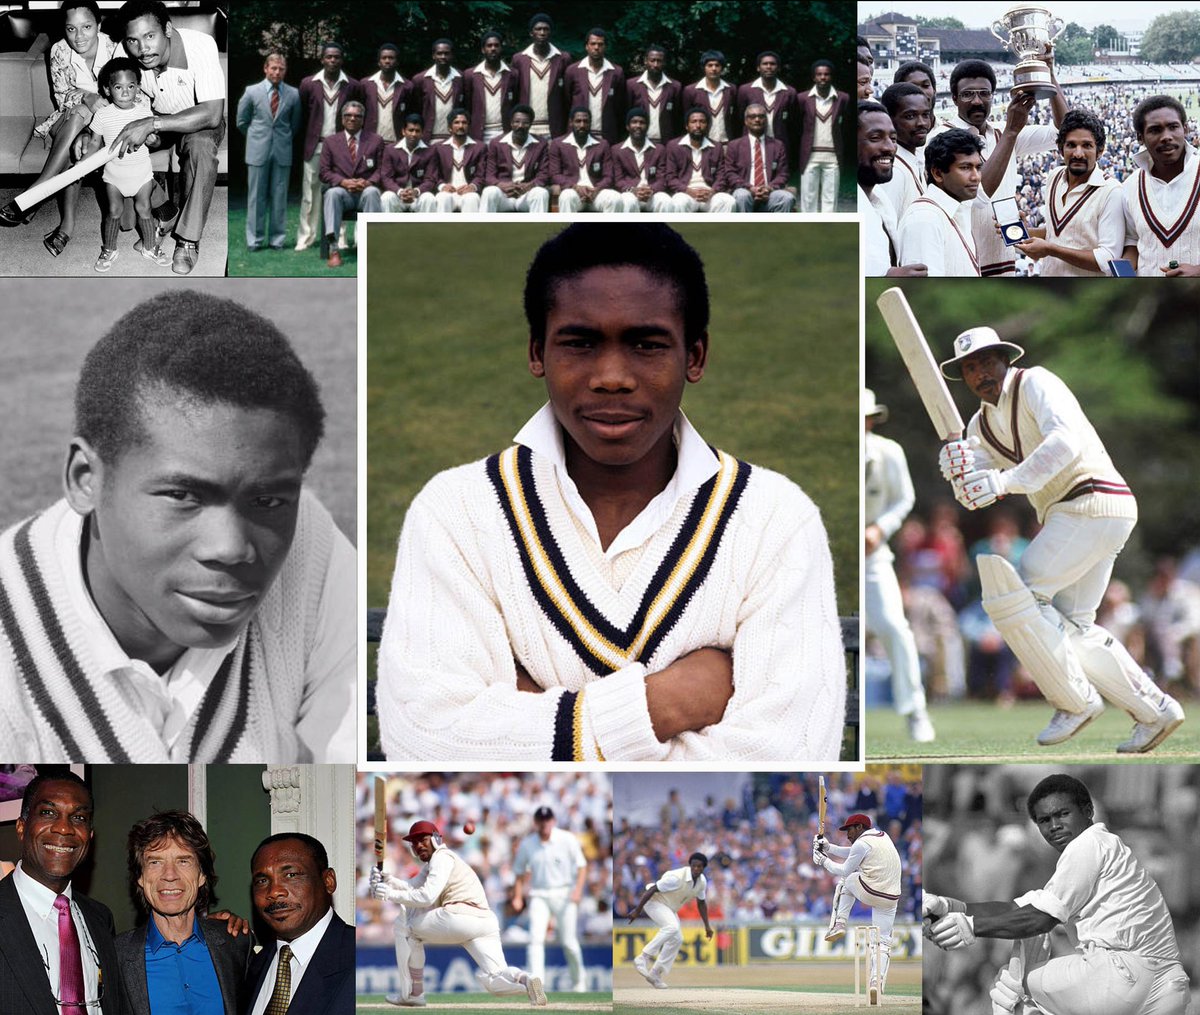 Gordon Greenidge, Legendary #WestIndies cricketer, born 73 years ago today on 1 May 1951, in St. Peter, #Barbados. With Desmond Haynes, one of greatest opening partnerships in cricket history; played prominent role in #Windies long reign as kings of the game. #Caribbean…